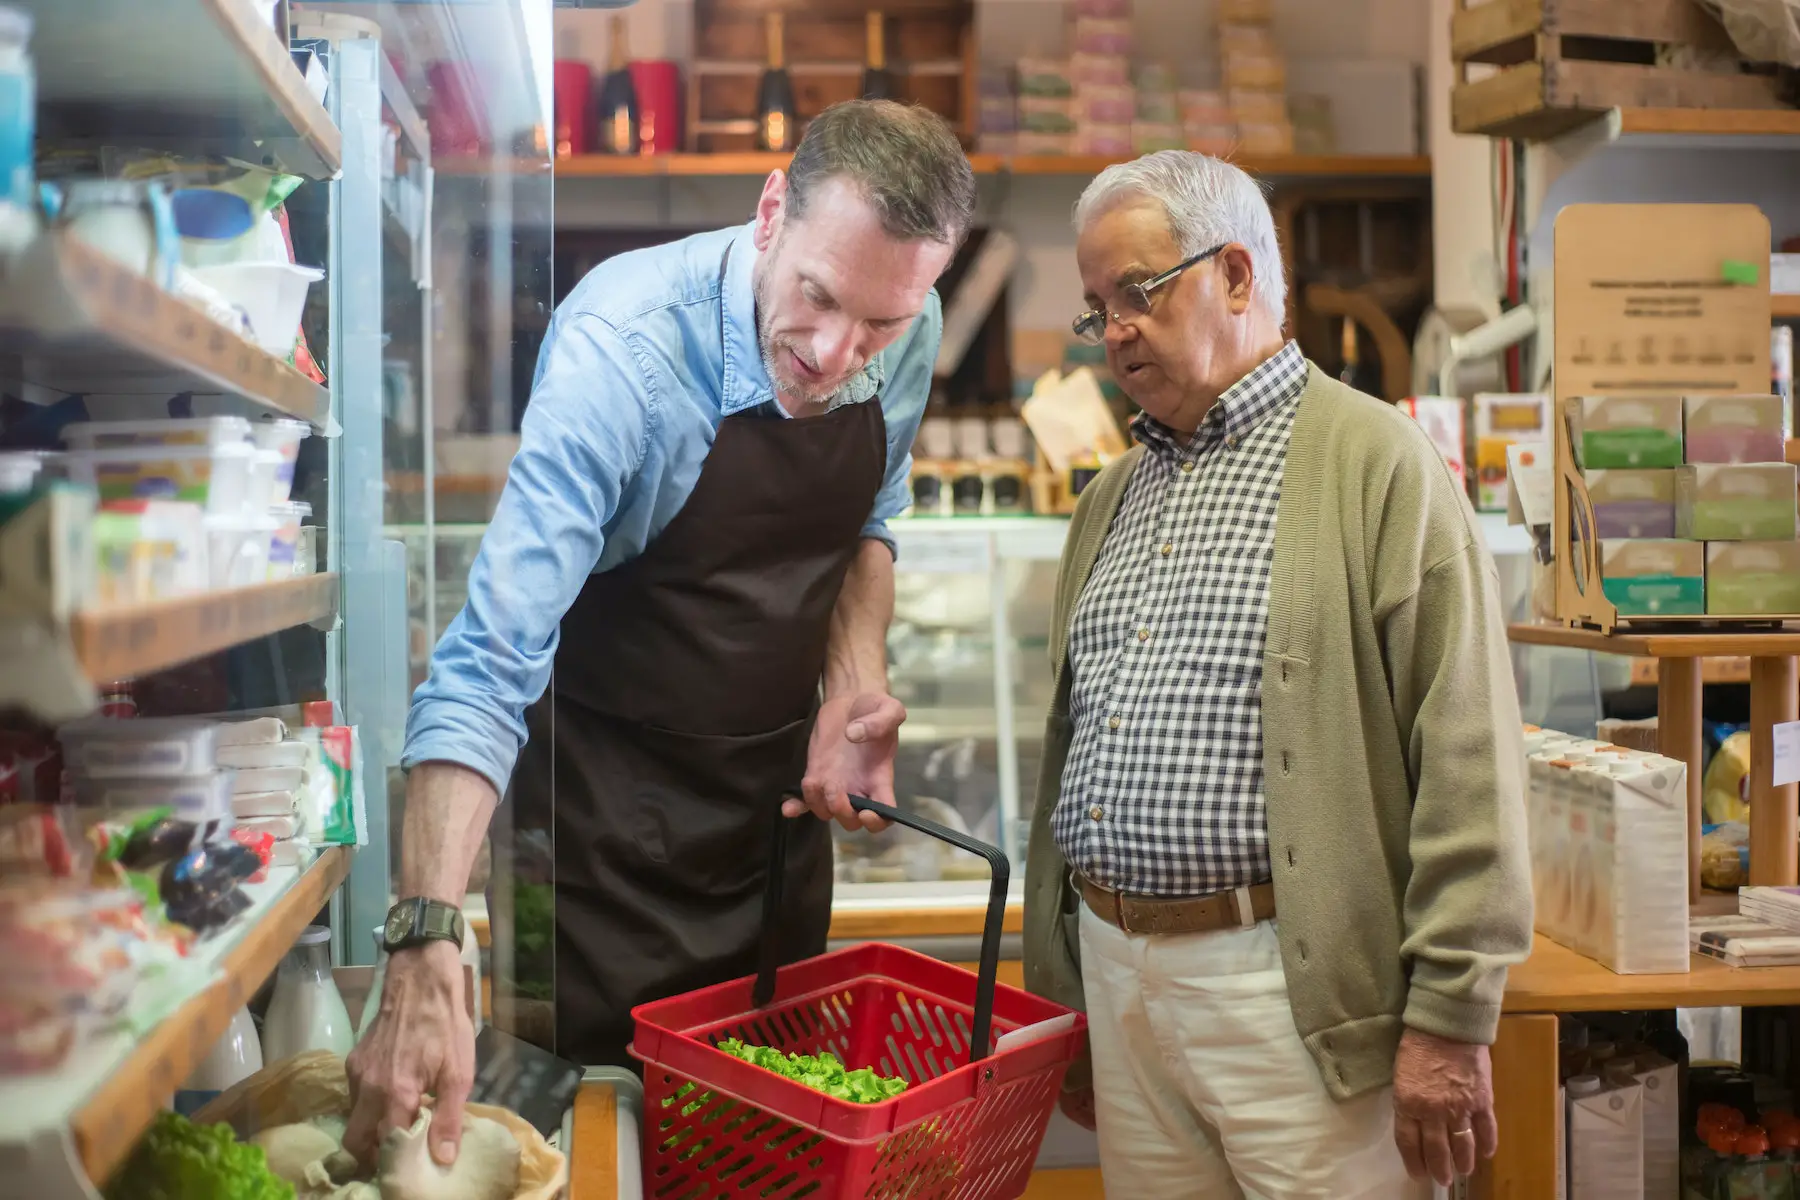 In an organic supermarket, an attendant helps an older customer looking for fresh produce